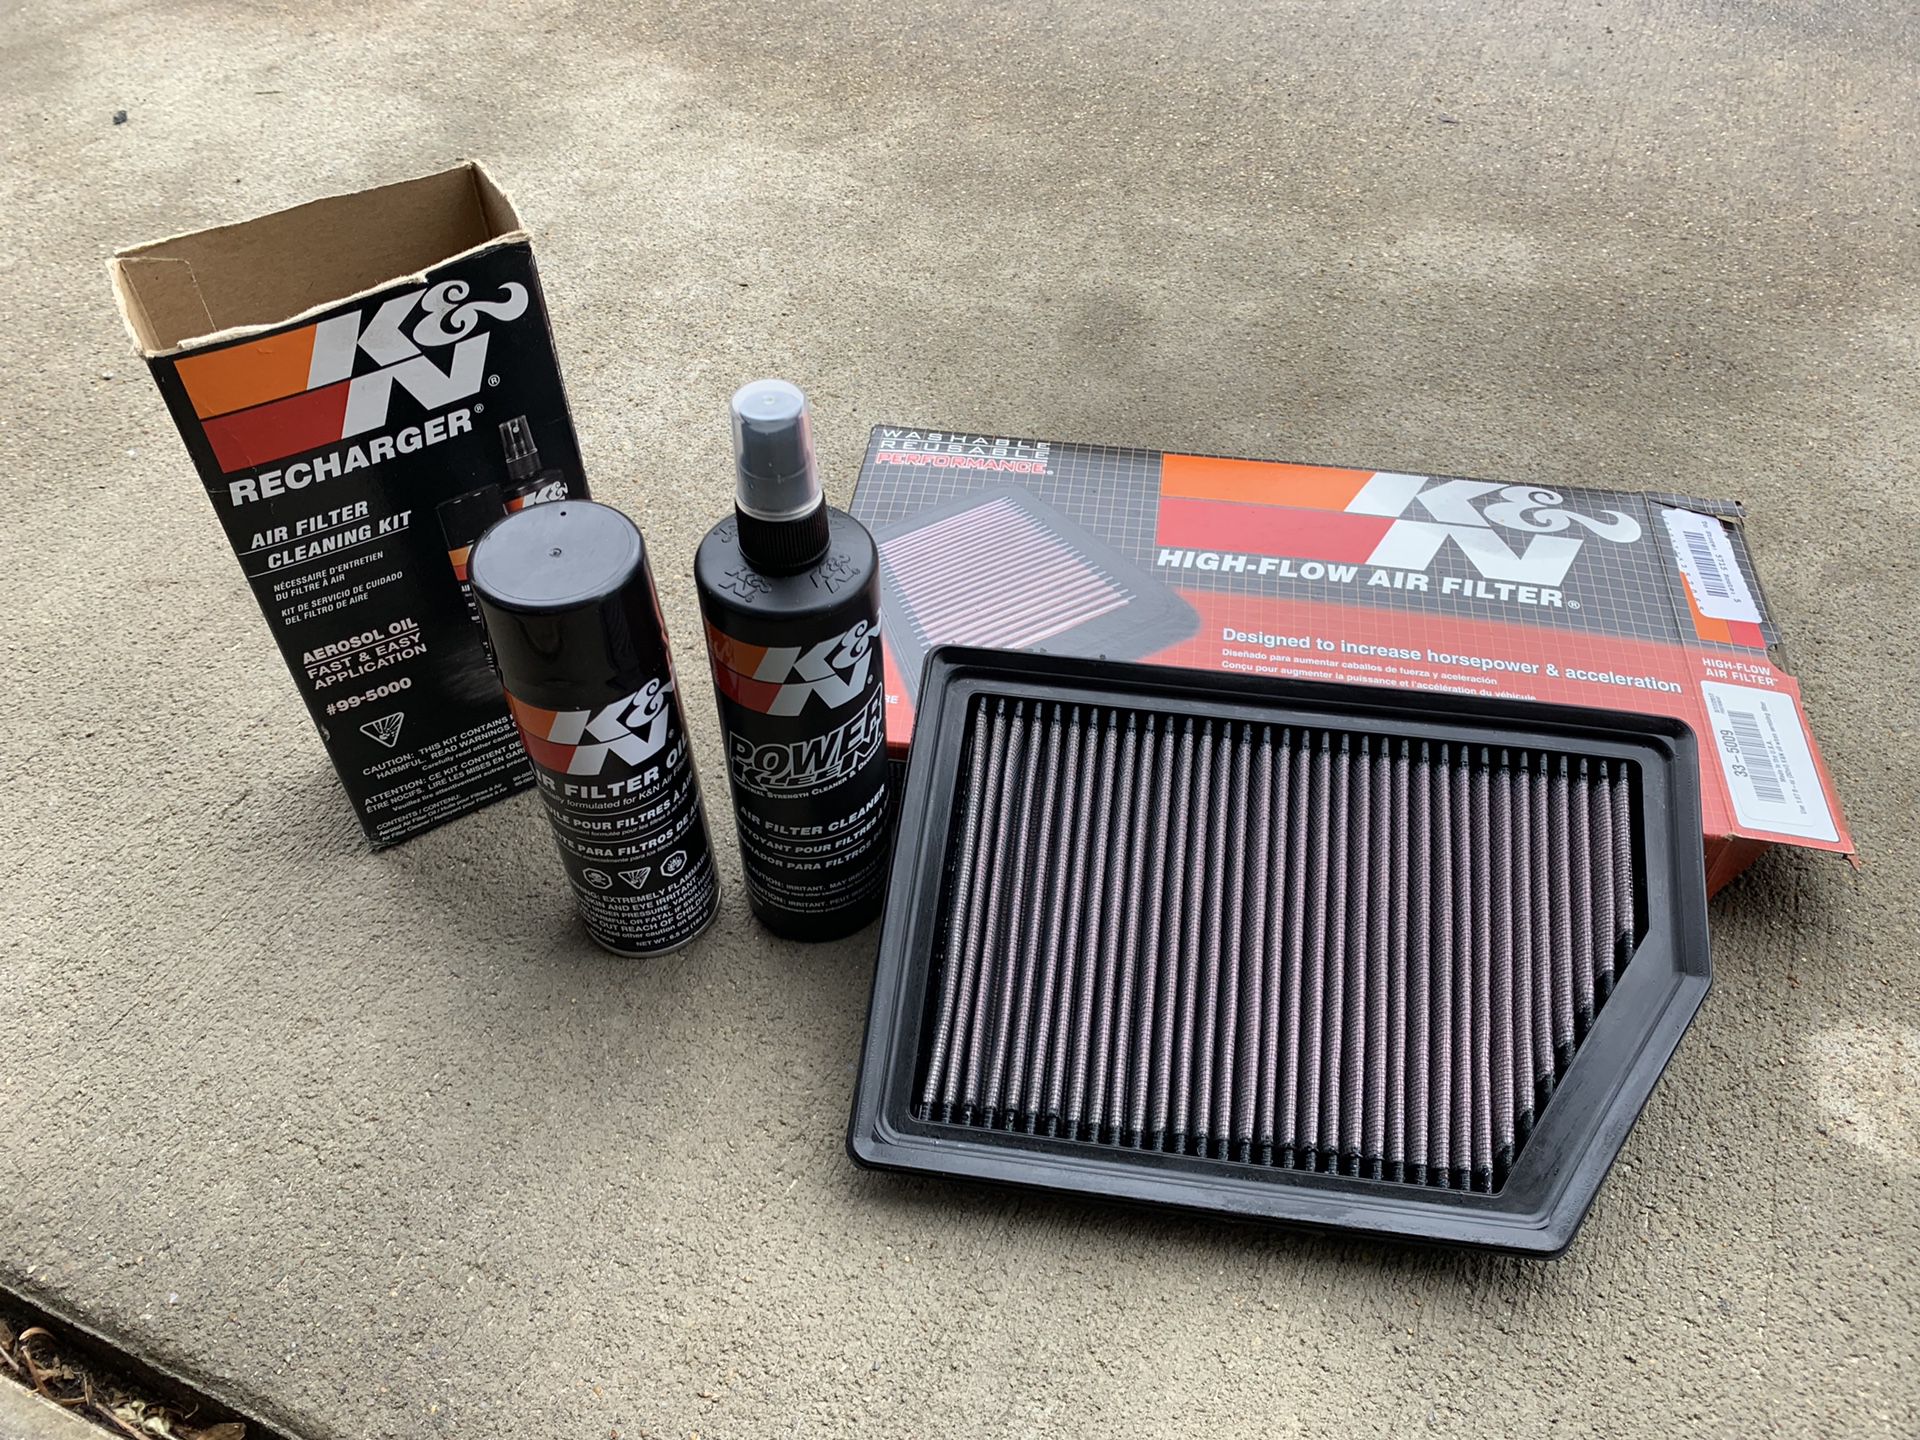 K & N Filter and Recharge Kit